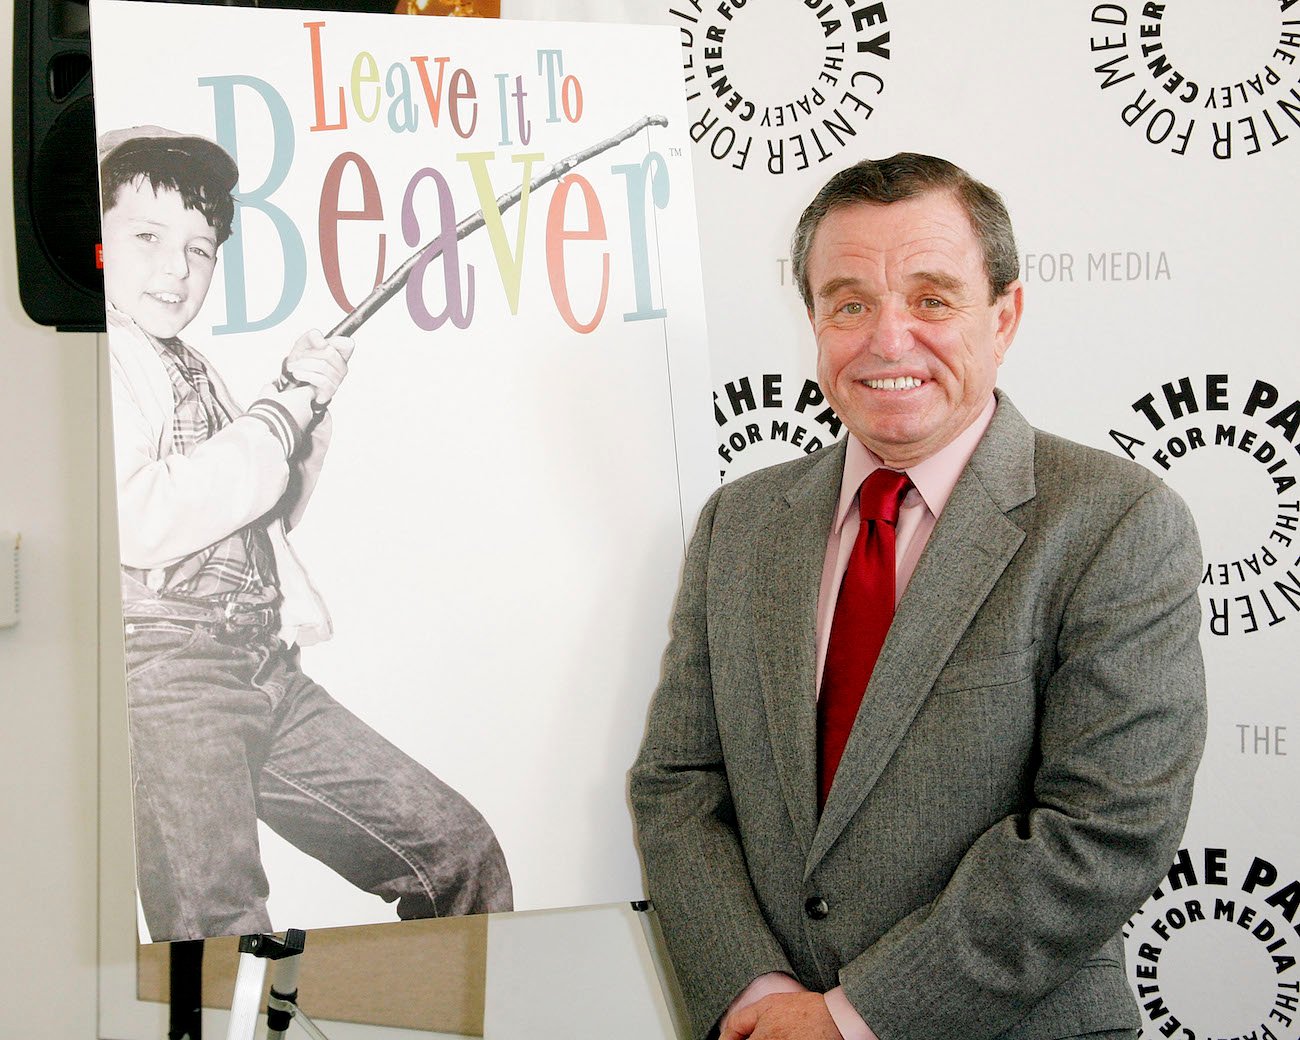 Jerry Mathers smiles as he stands next to a photo of himself as Theodore "Beaver" Cleaver at PaleyFest: Rewind 'Leave It to Beaver'